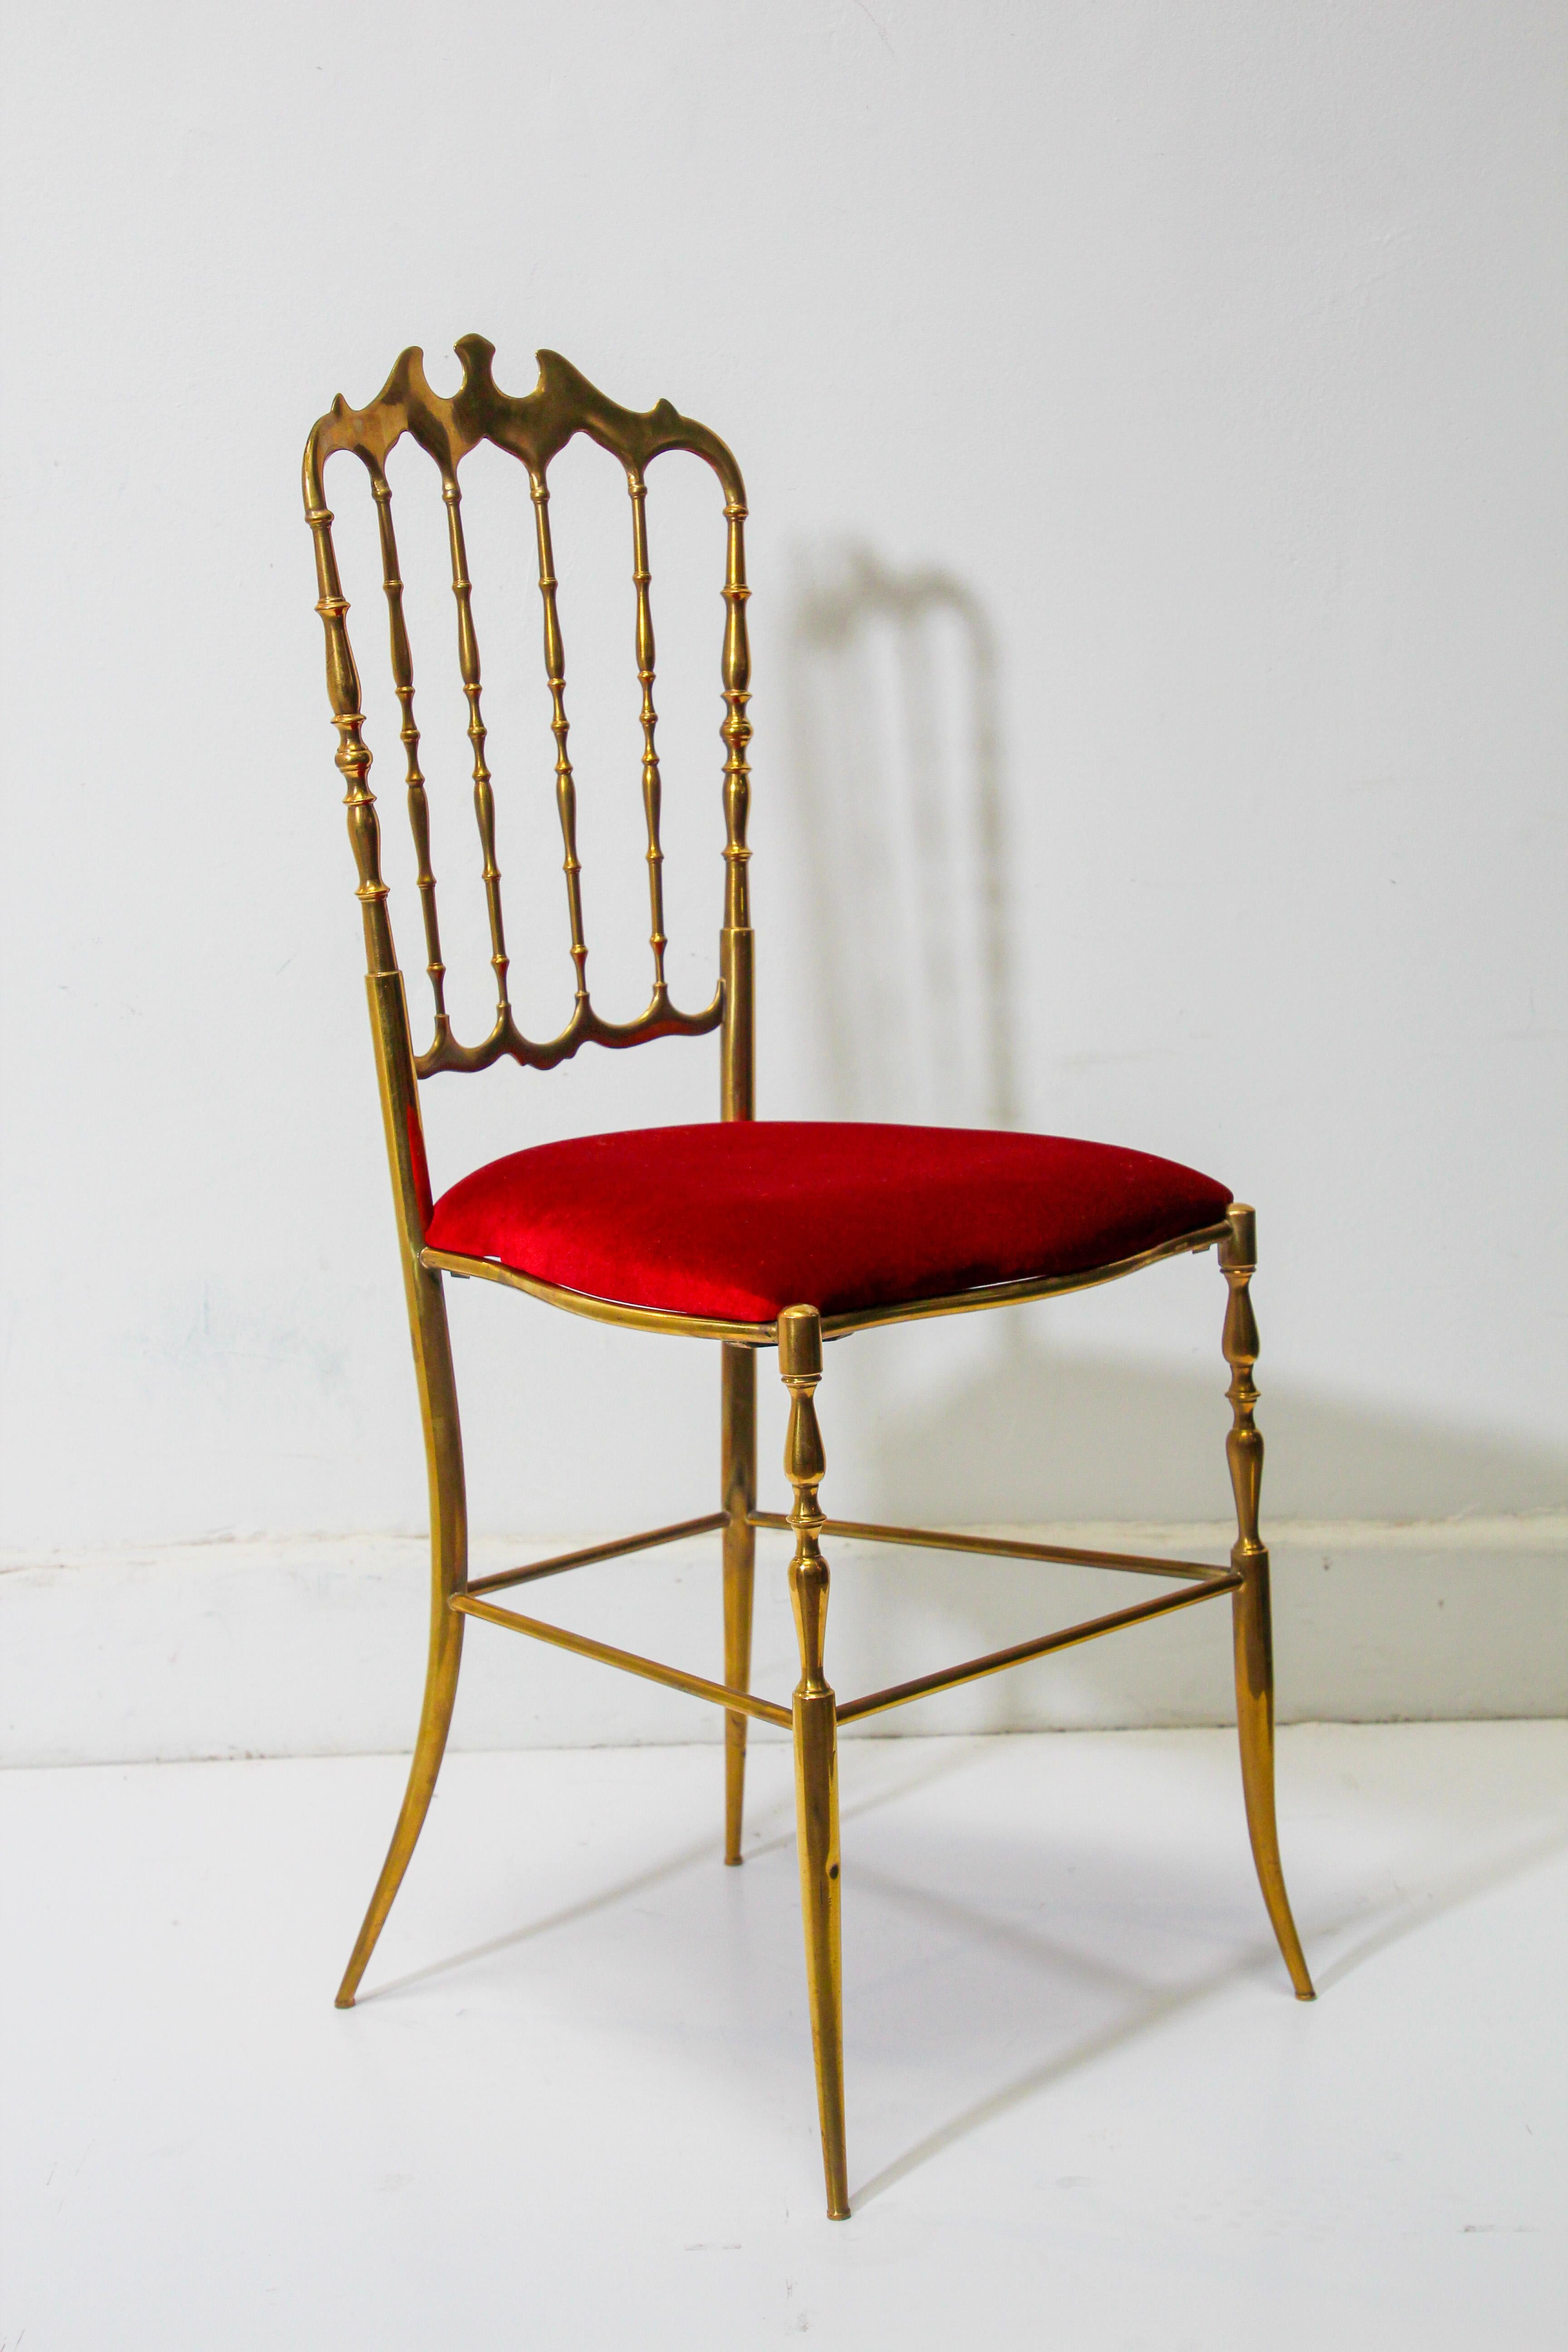 Mid-20th Century Chiavari Chair, Polished Brass Italy, 1960s For Sale